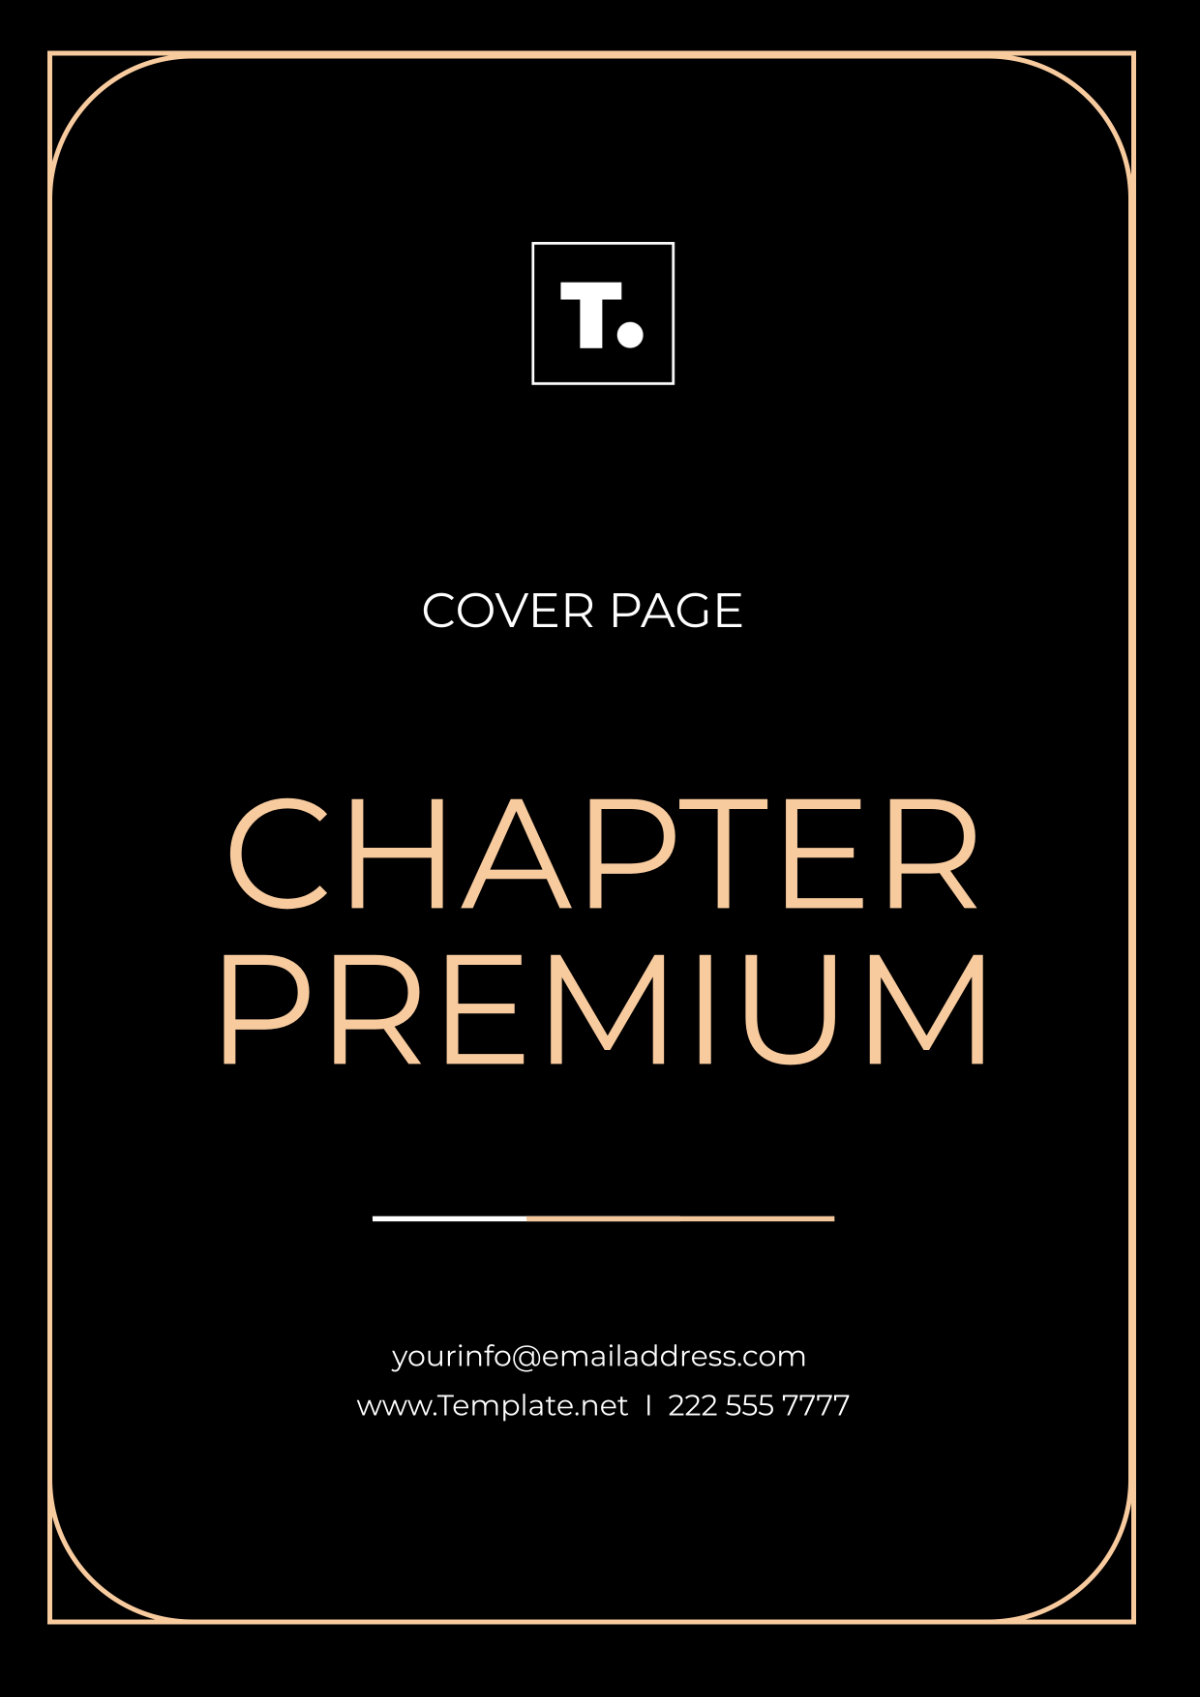 Free Chapter Premium Cover Page Template